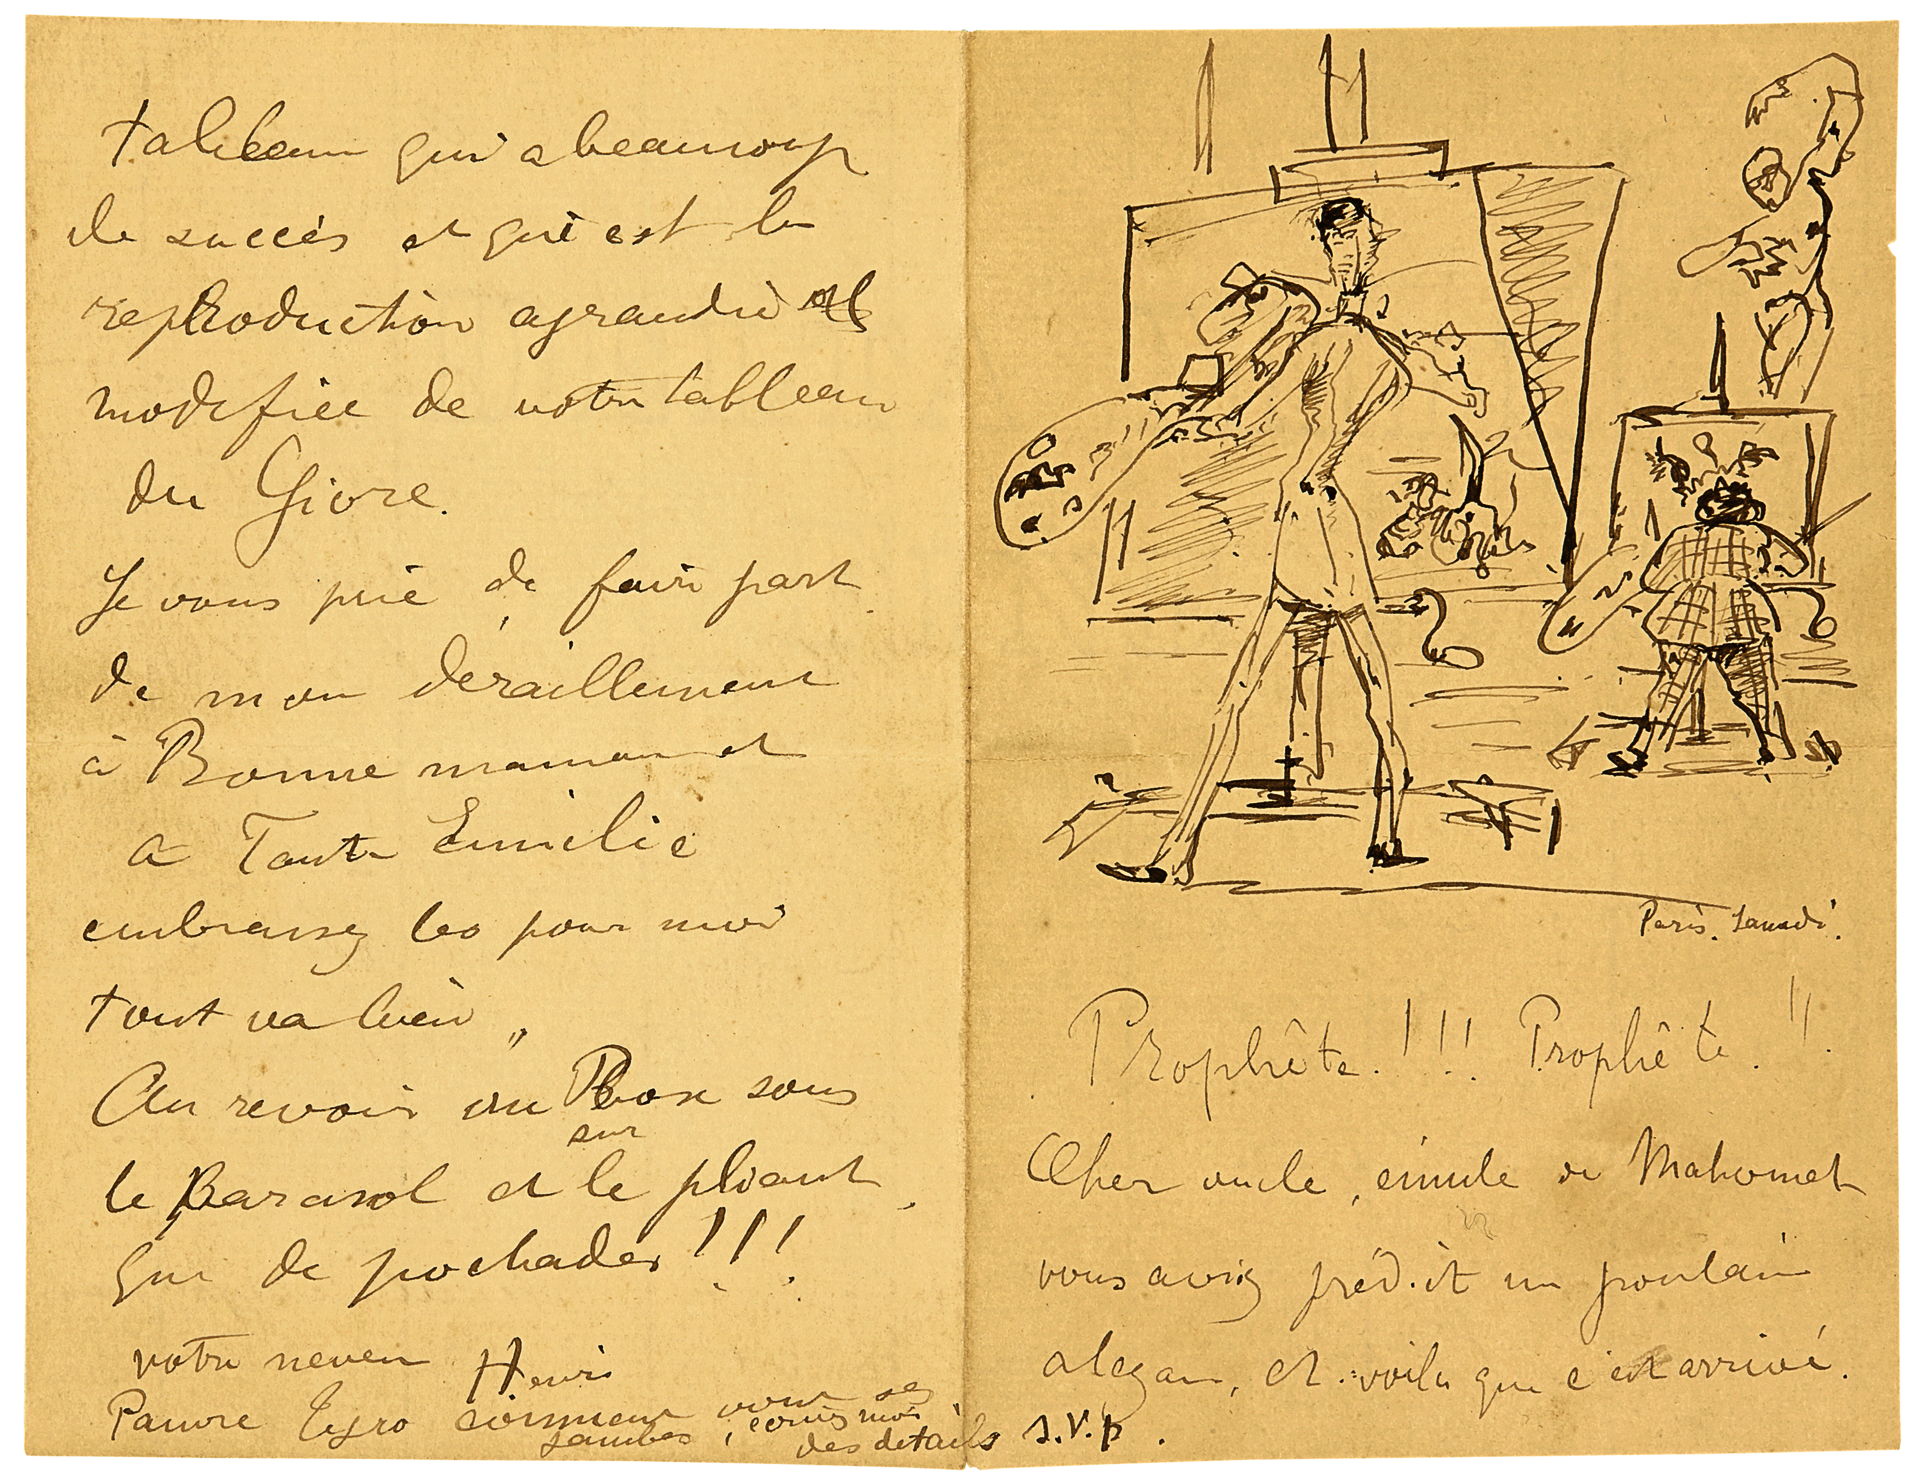 At left and bottom right is handwritten text in French. At top right is a sketch of a tall artist and a short artist painting at easels.